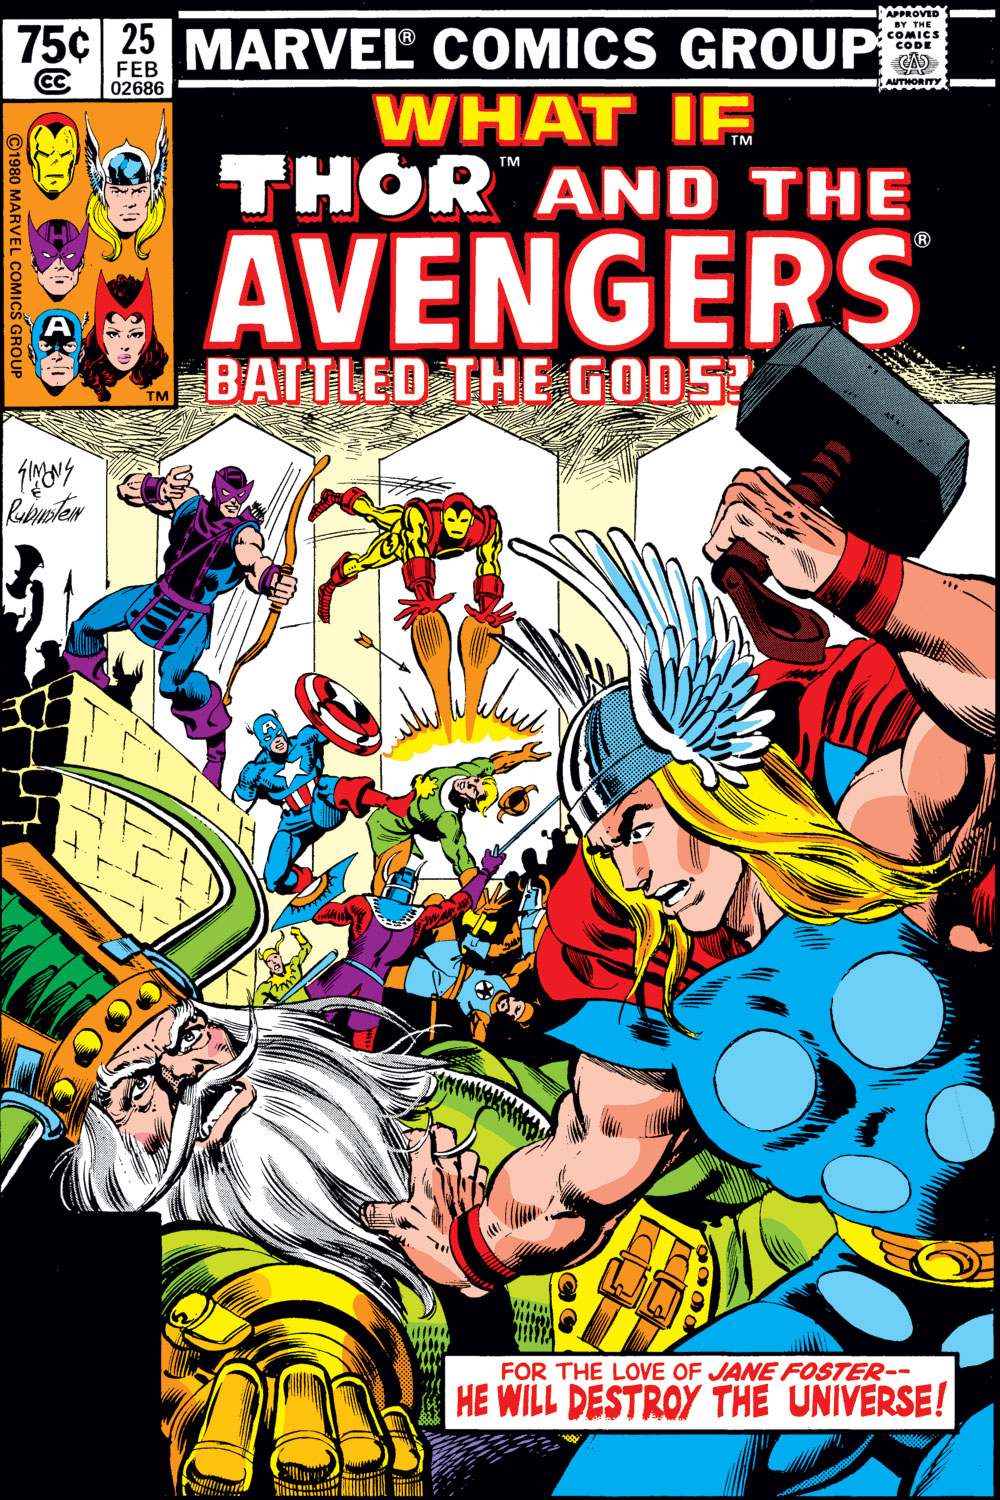 What If? (1977) issue 25 - Thor and the Avengers battled the gods - Page 1